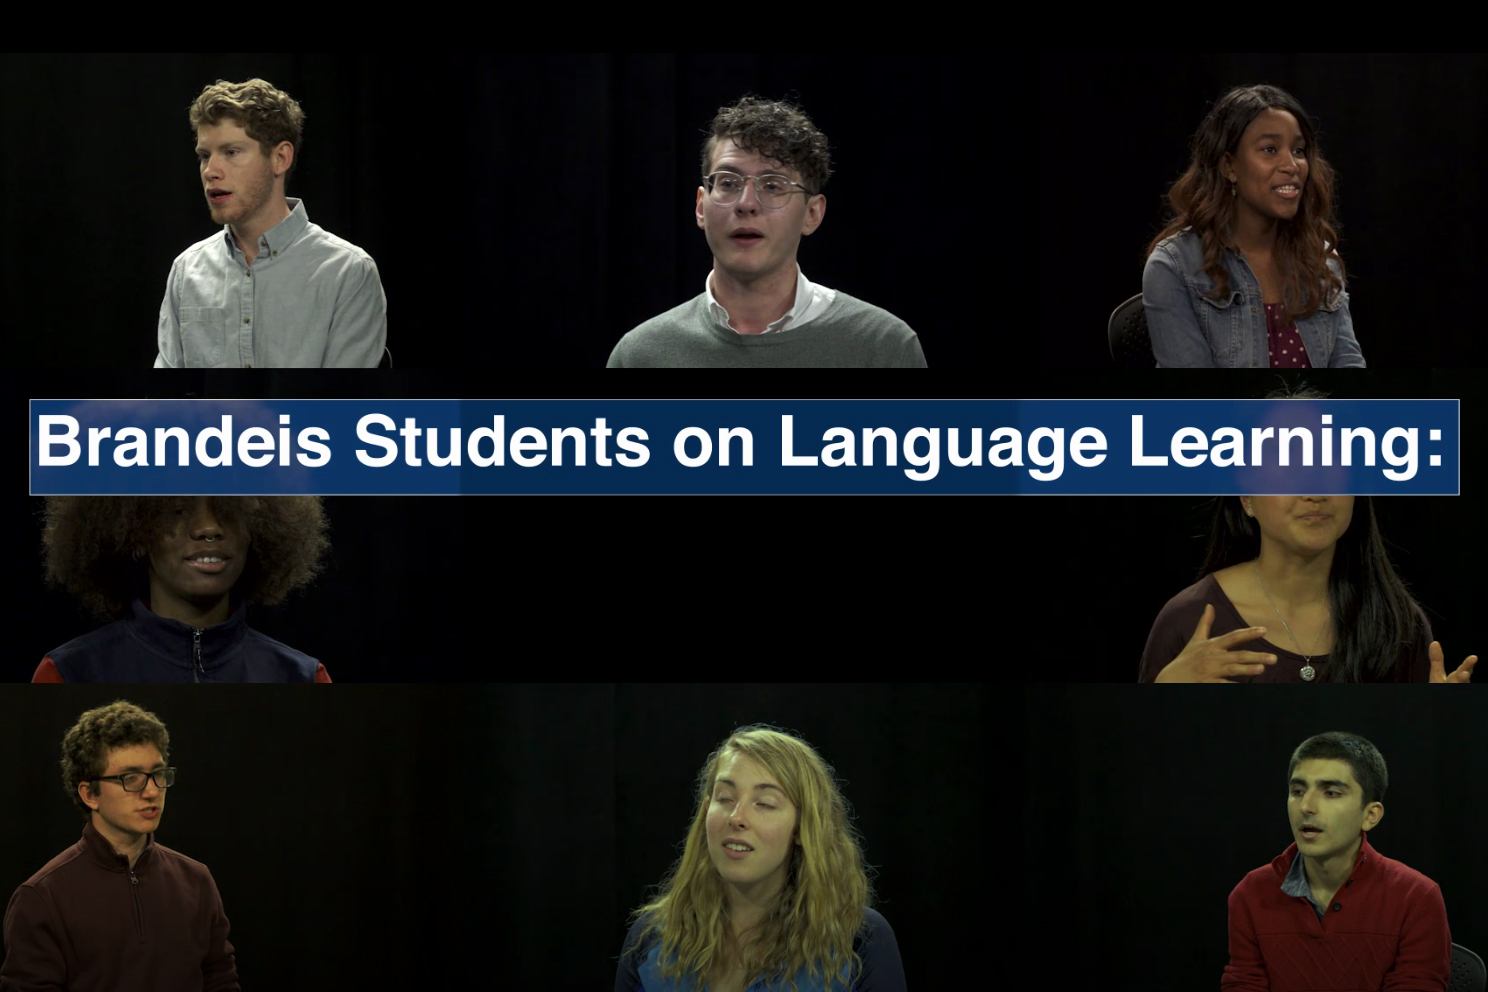 compilation of images of students in the video with text overlap that reads: Brandeis Students on Langauge Learning: